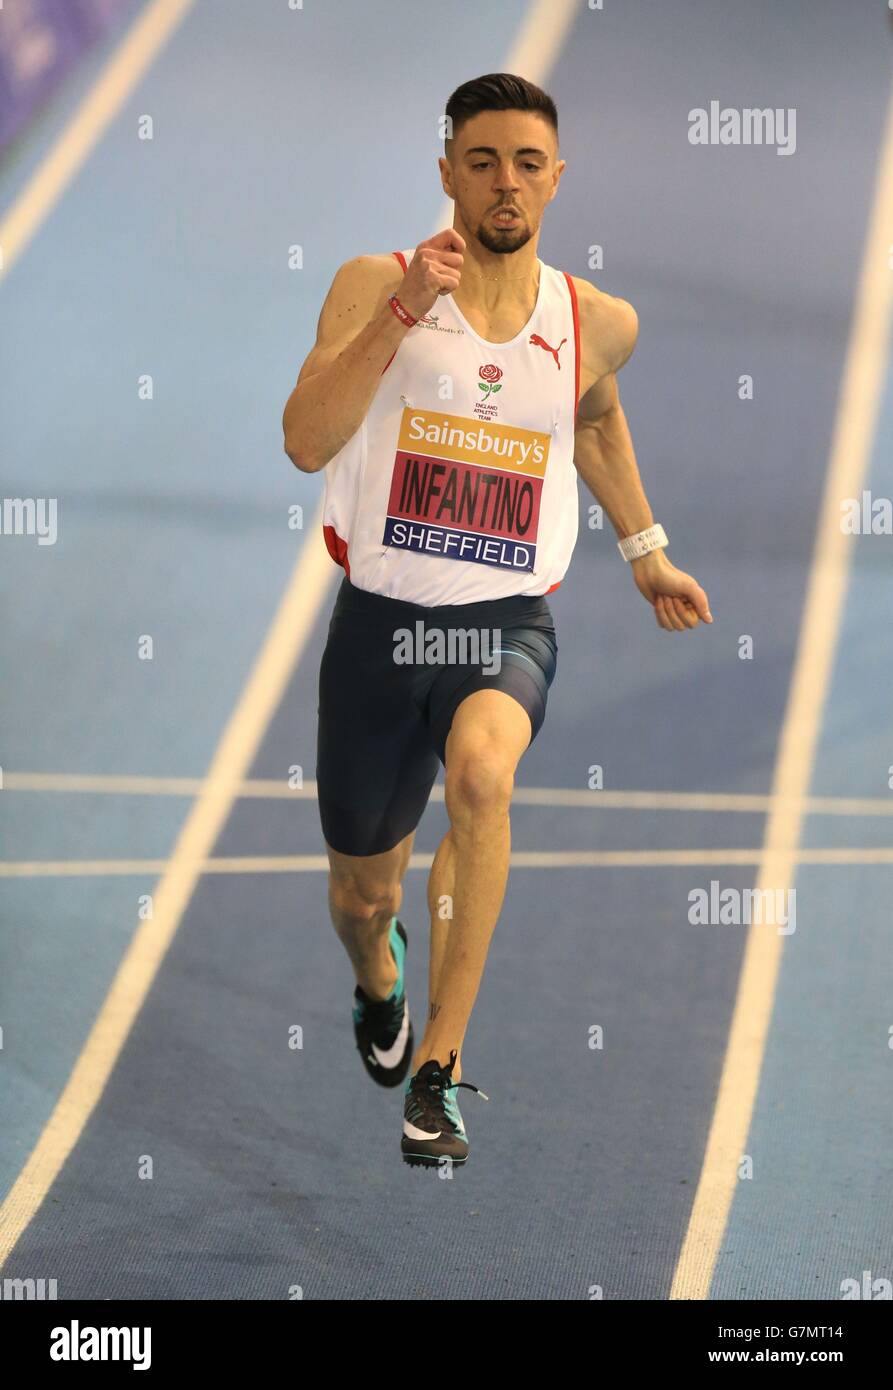 Antonio Infantino during the mens 200m semi final during day two of the Sainsbury's British Indoor Championships at the English Institute of Sport, Sheffield. Stock Photo